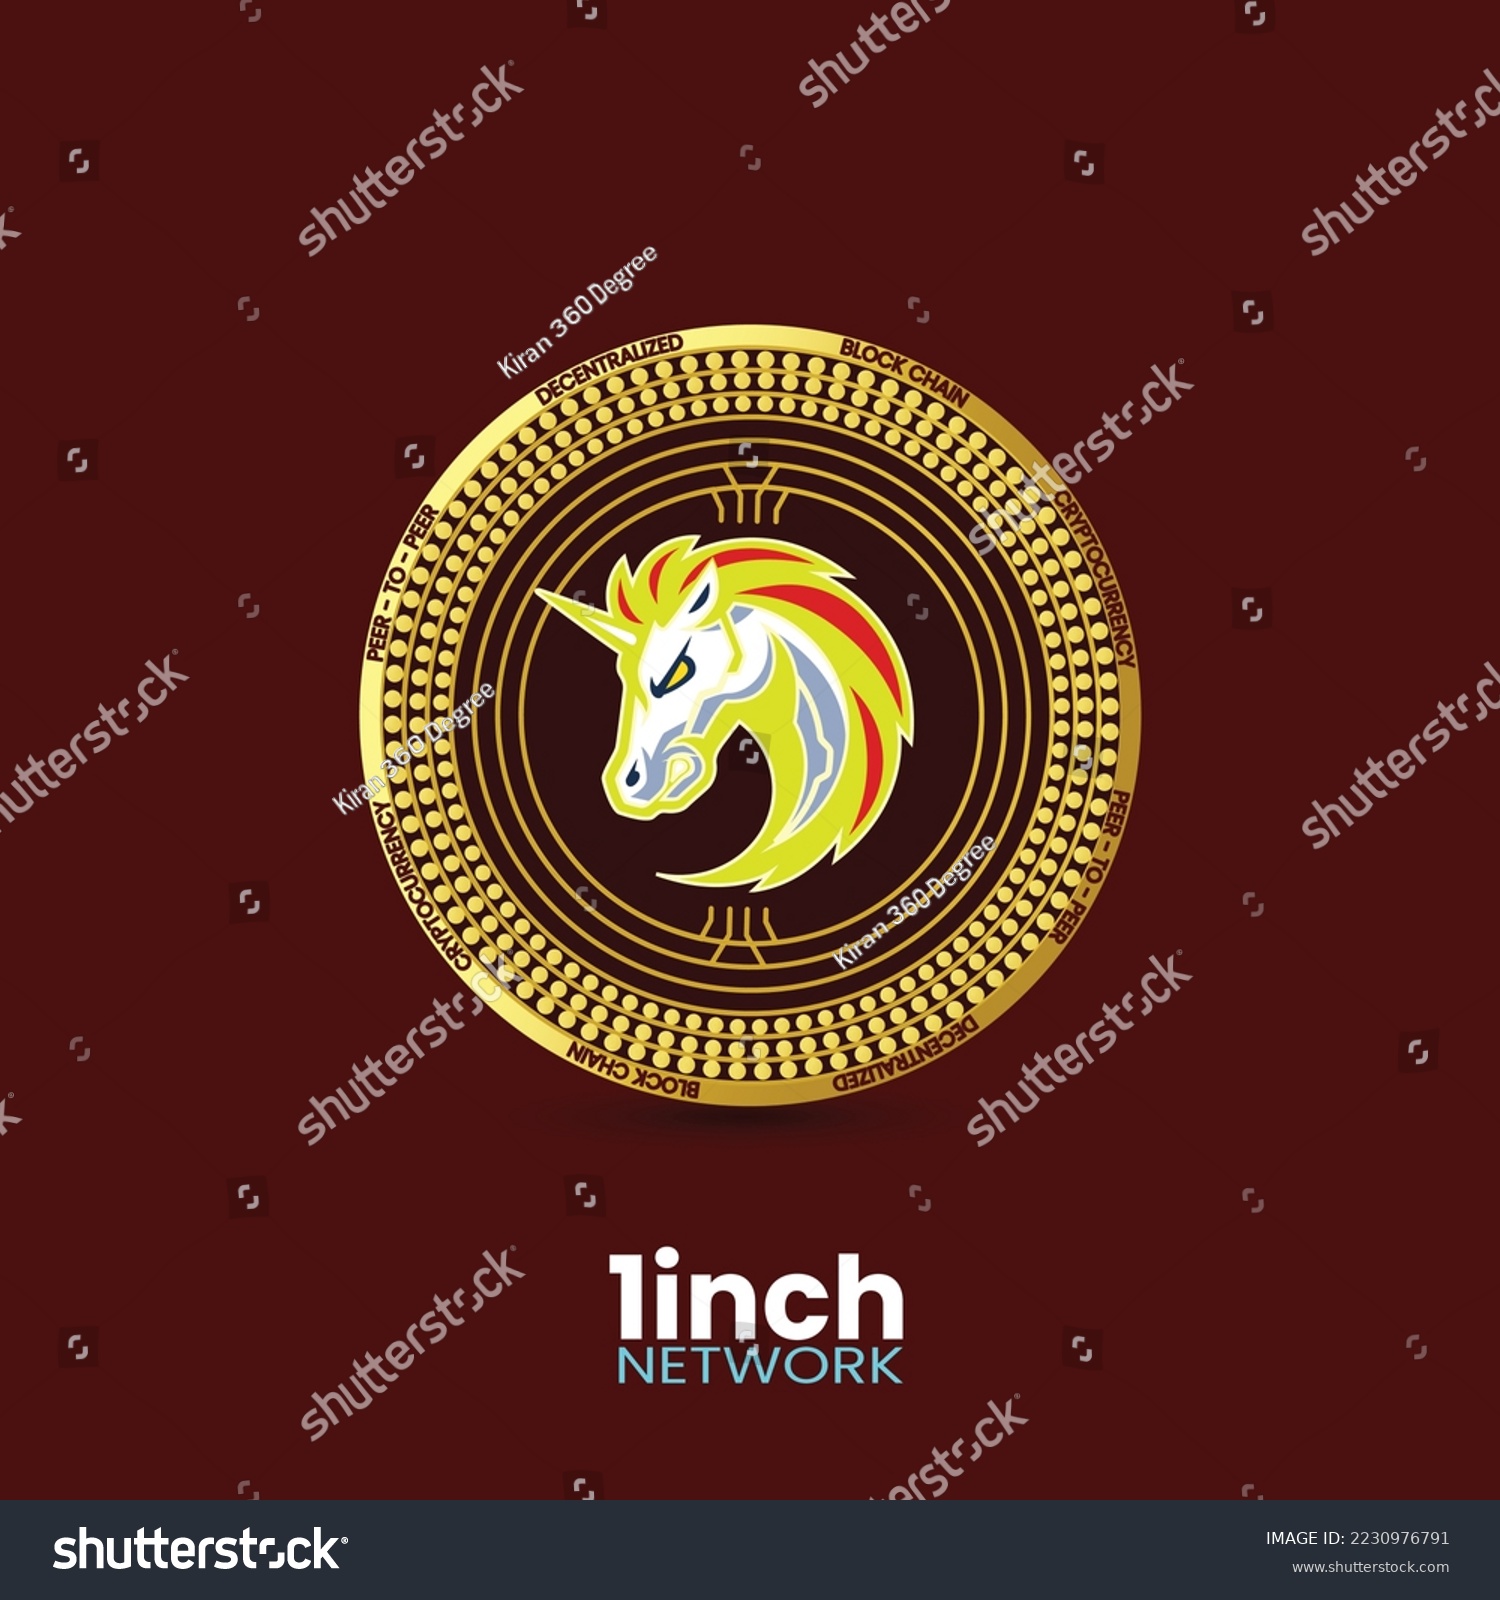 SVG of 1Inch Network 1INCH Cryptocurrency coin isolated on dark red background, Blockchain, finance symbol. Vector illustration, Crypto logotype symbol vector illustration of digital currency brand. svg